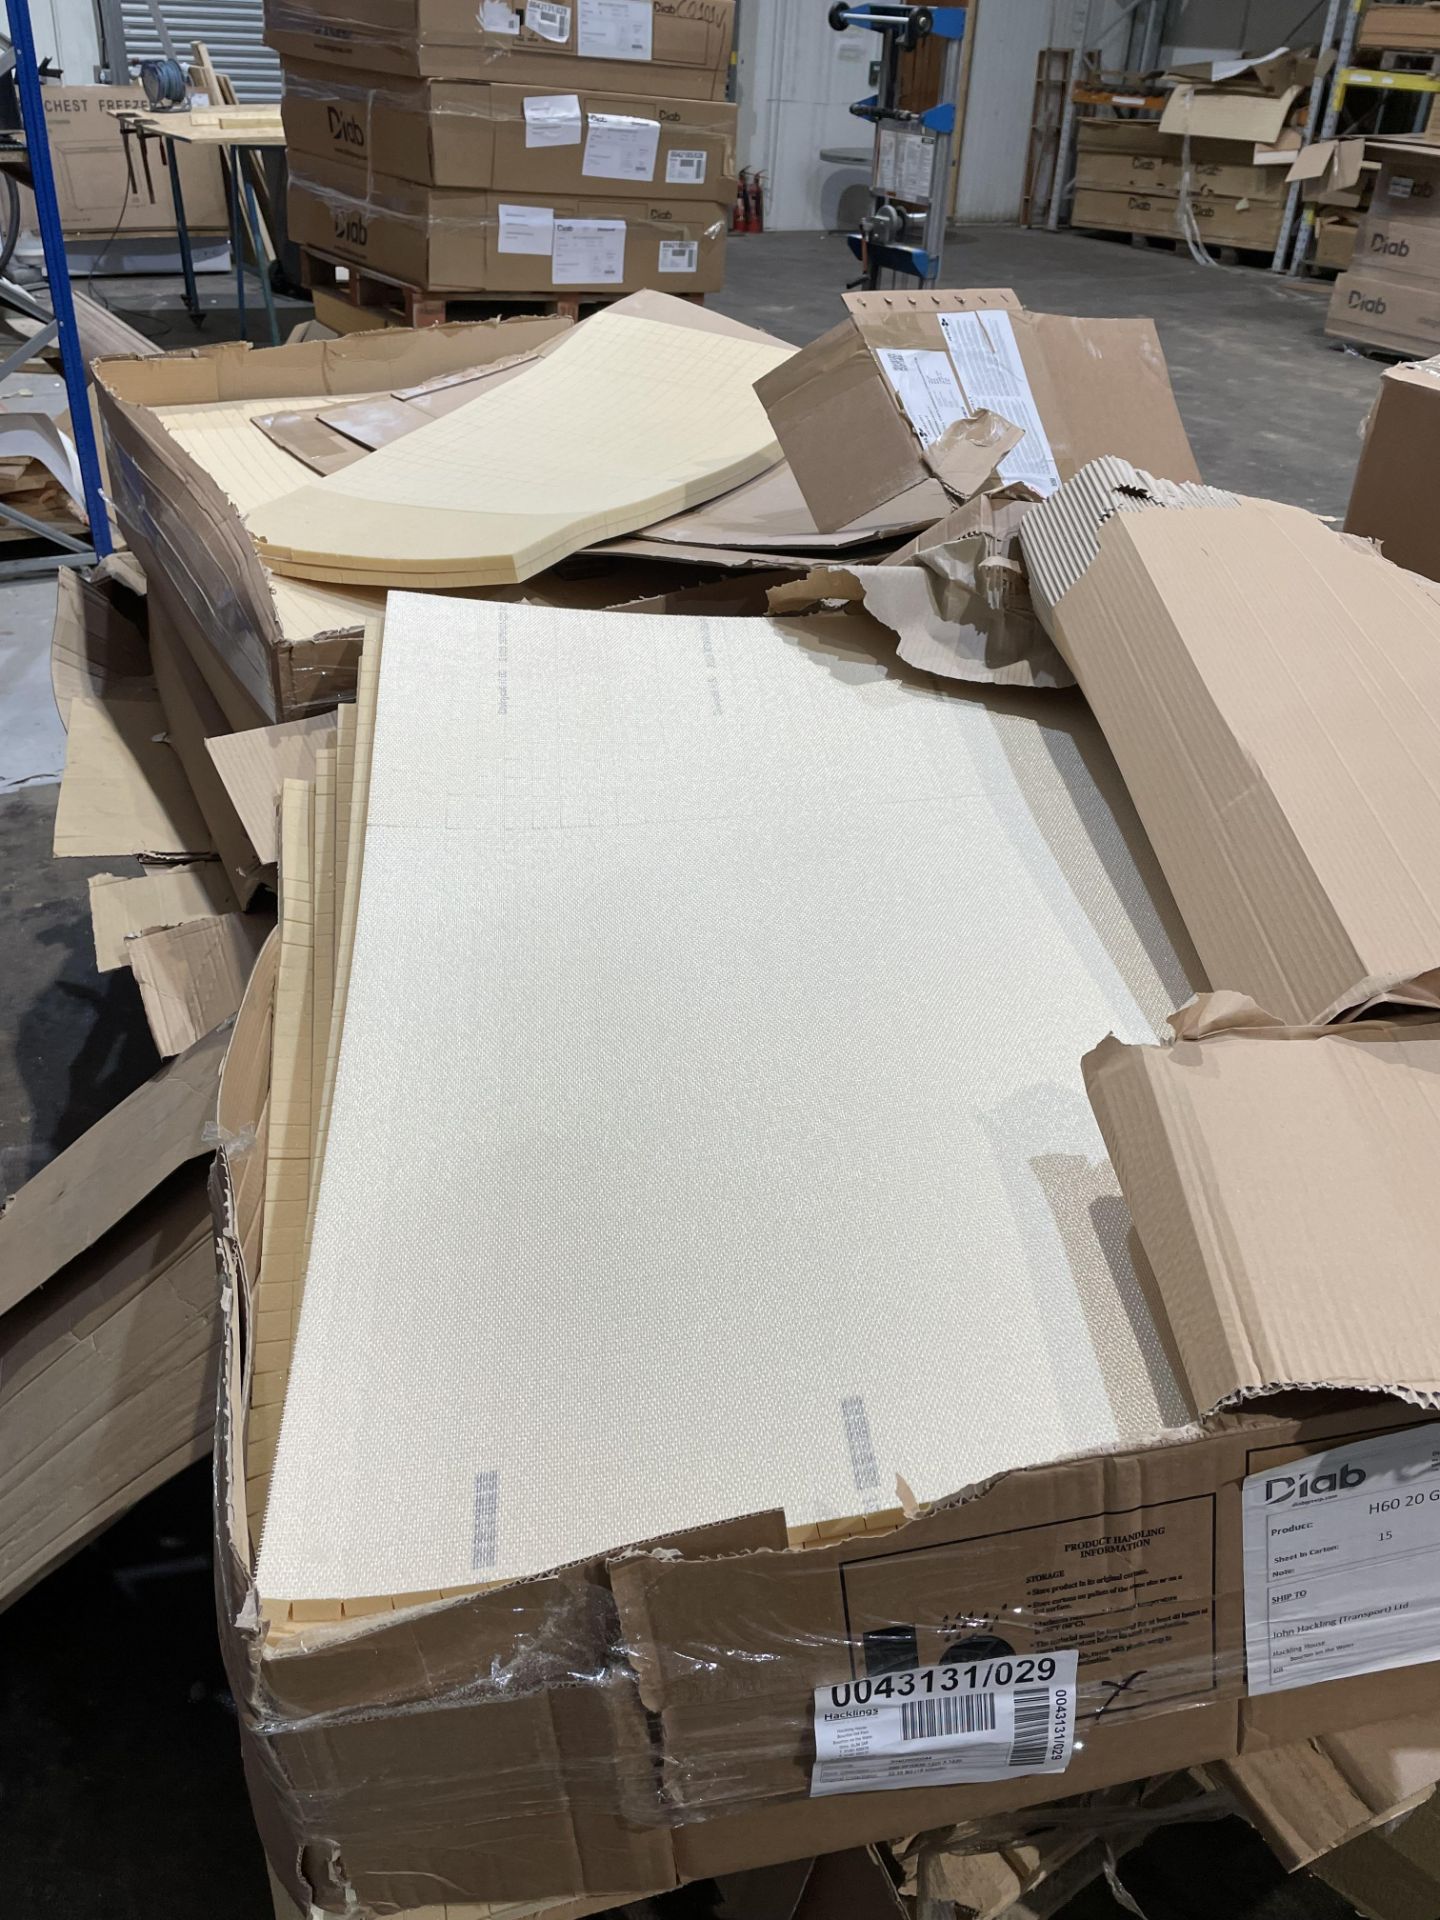 Large Quantity of Diab Divinycell Foam Core Sheets and Offcuts - Various Grades and Thicknesses to I - Image 16 of 17